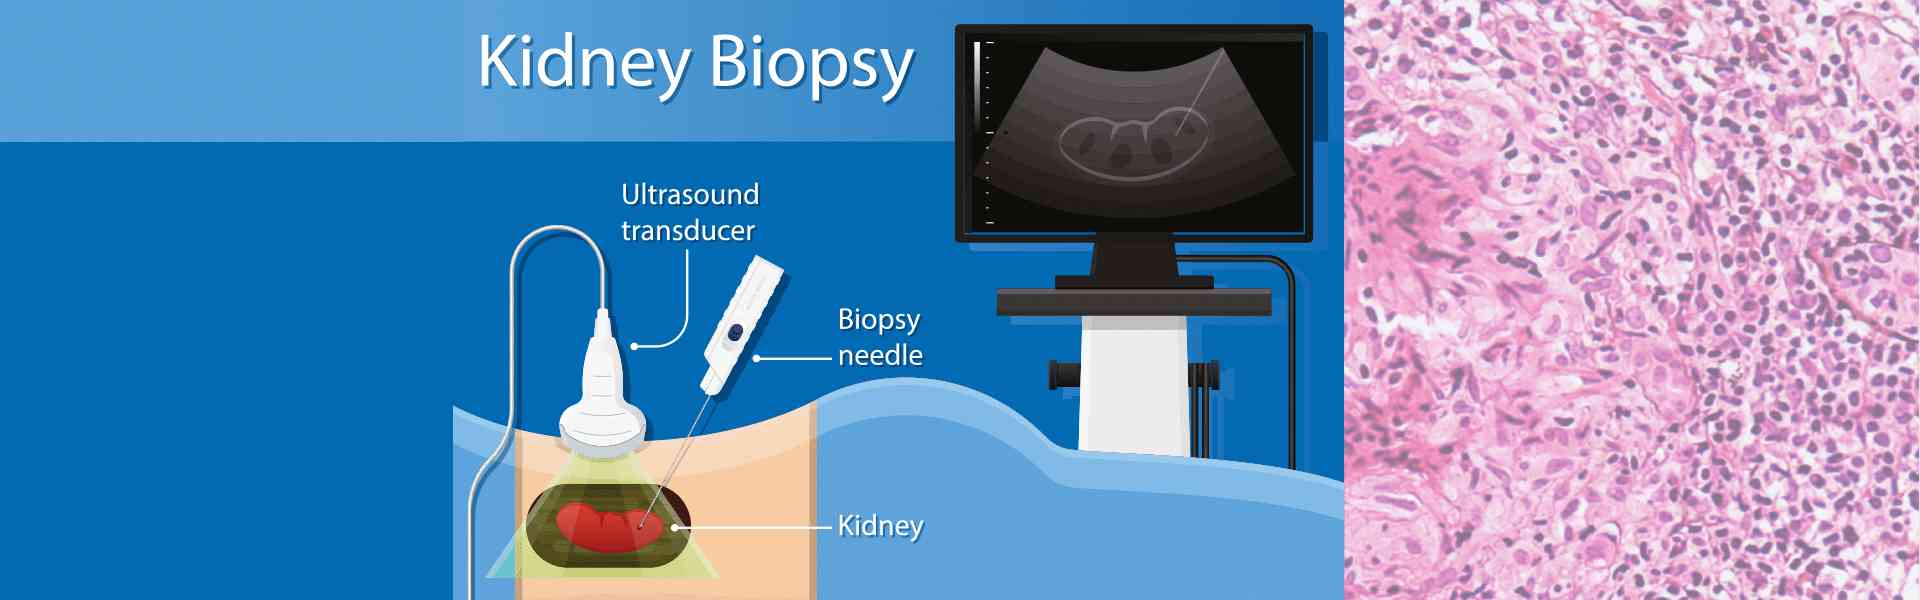 Kidney Biopsy Treatment in Old Airport Road